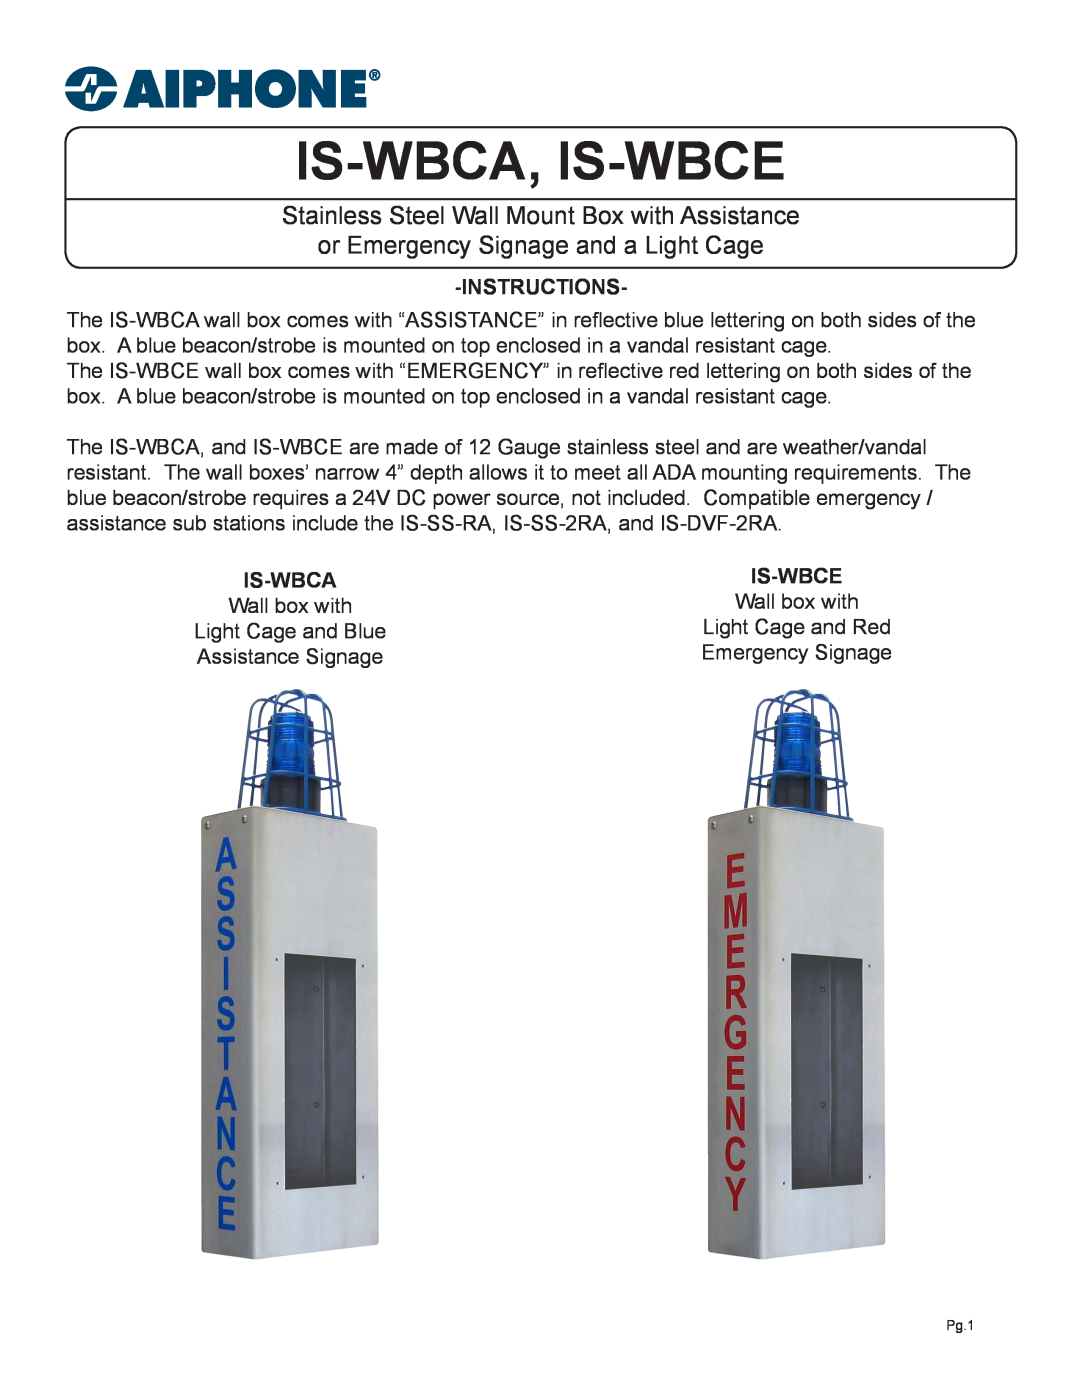 Aiphone IS-WBCA manual Instructions, Is-Wbca, Is-Wbce, Stainless Steel Wall Mount Box with Assistance 